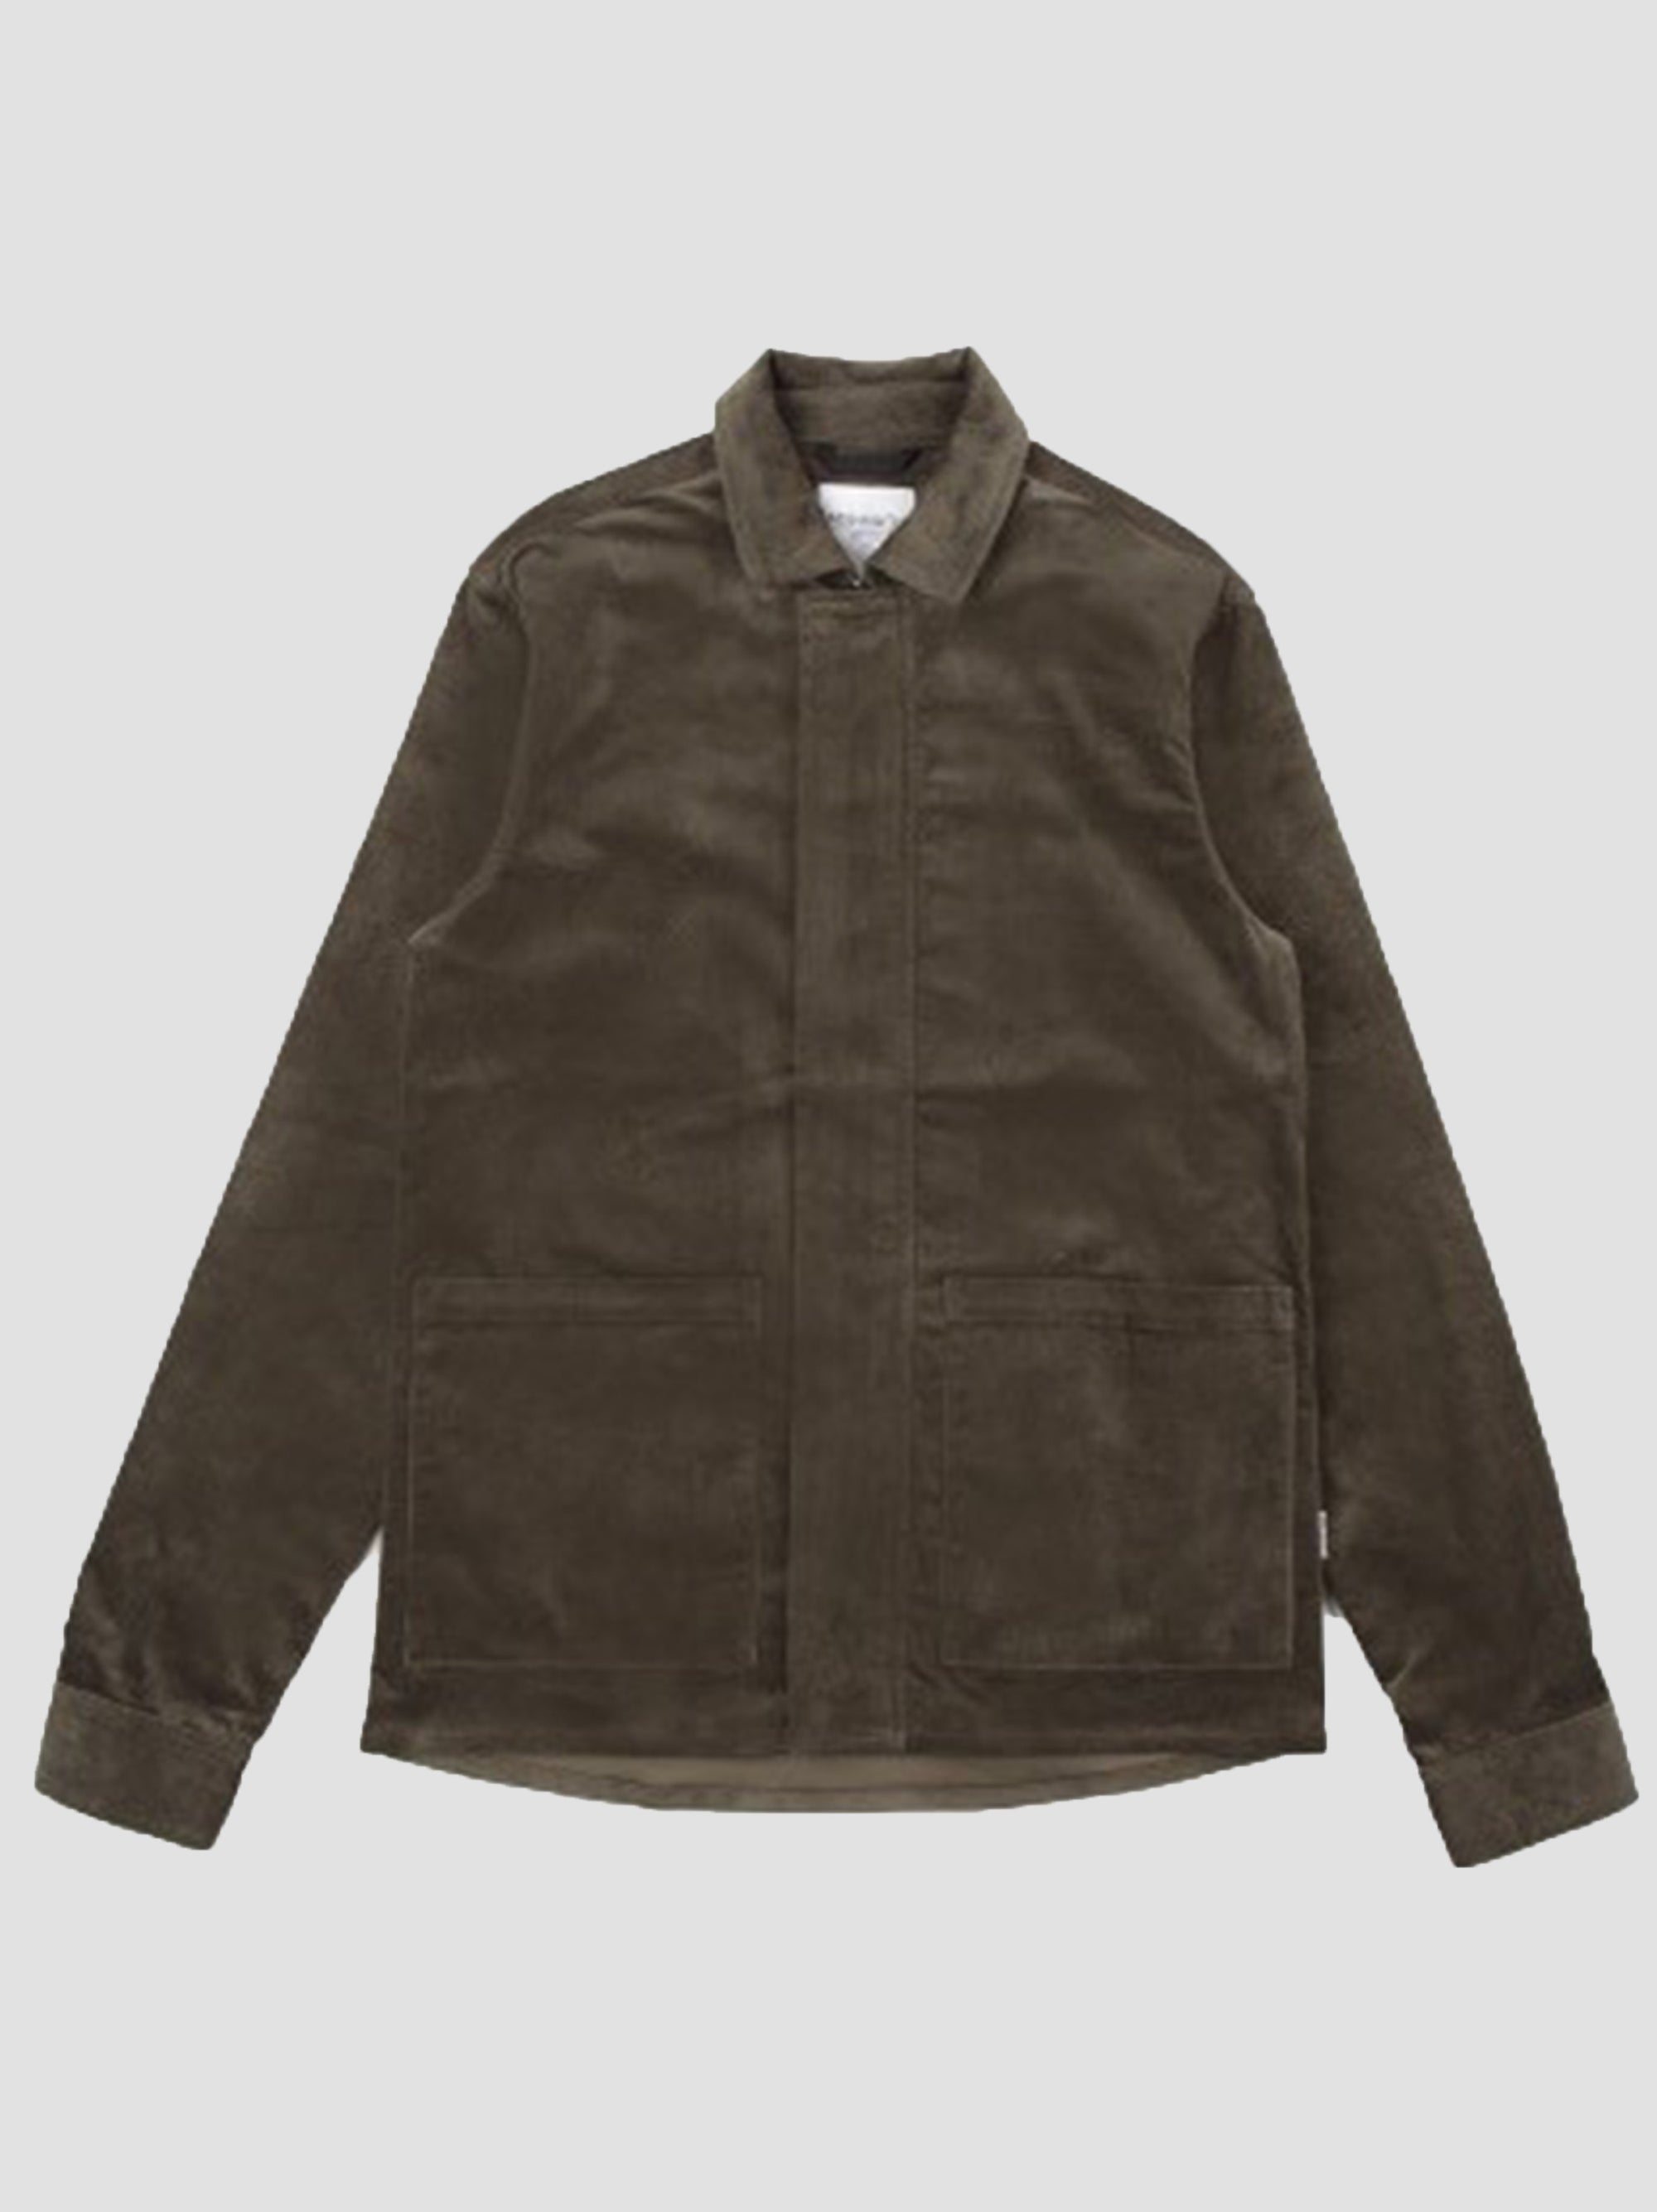 Regular fit casual corduroy jacket in khaki with full zip and placket fastening mish mash